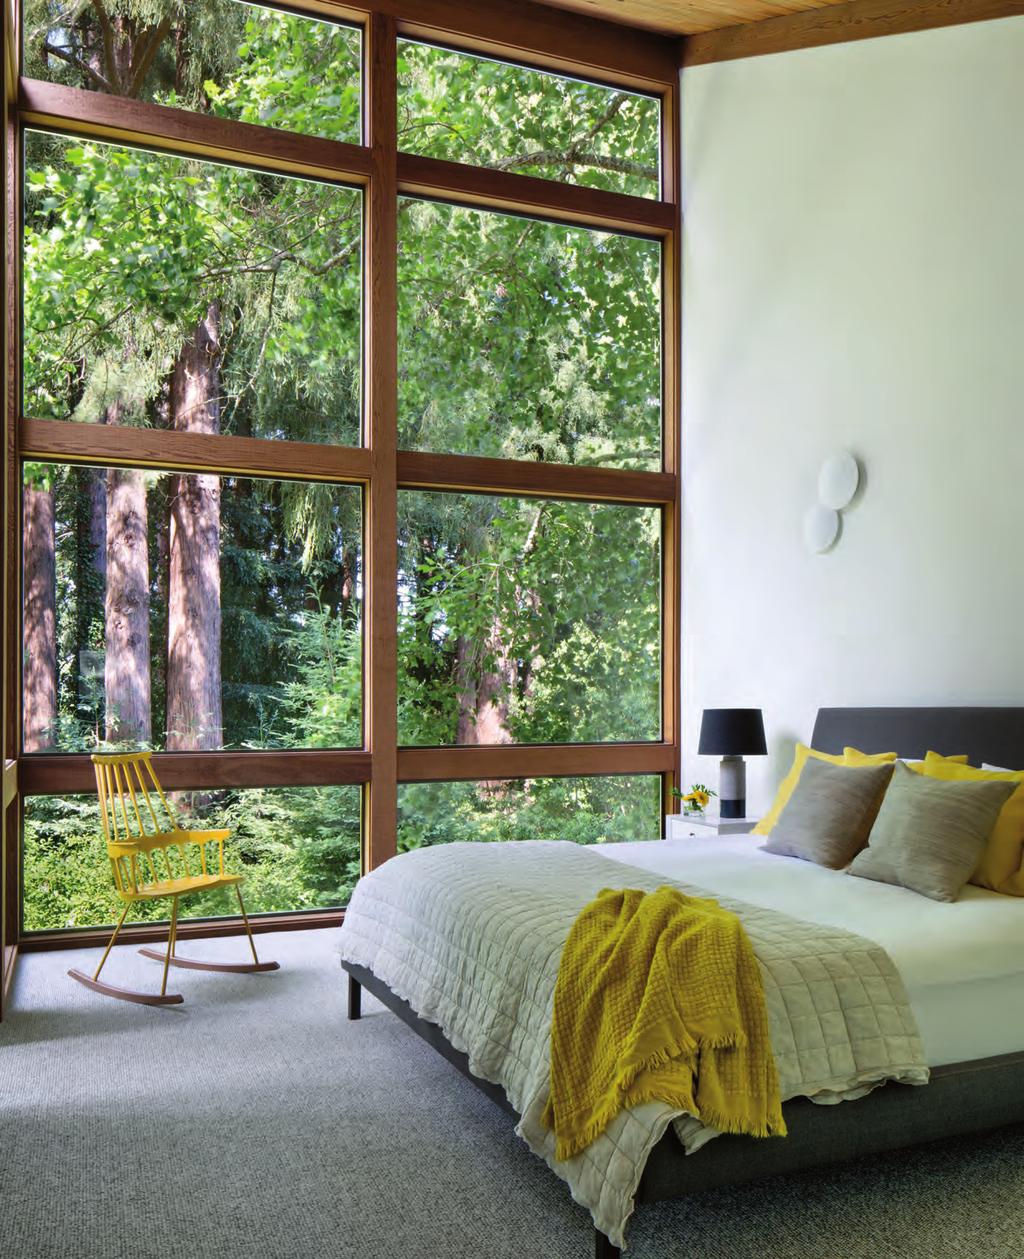 Below, left: The guest bathroom features the same leafy views as the guest bedroom.